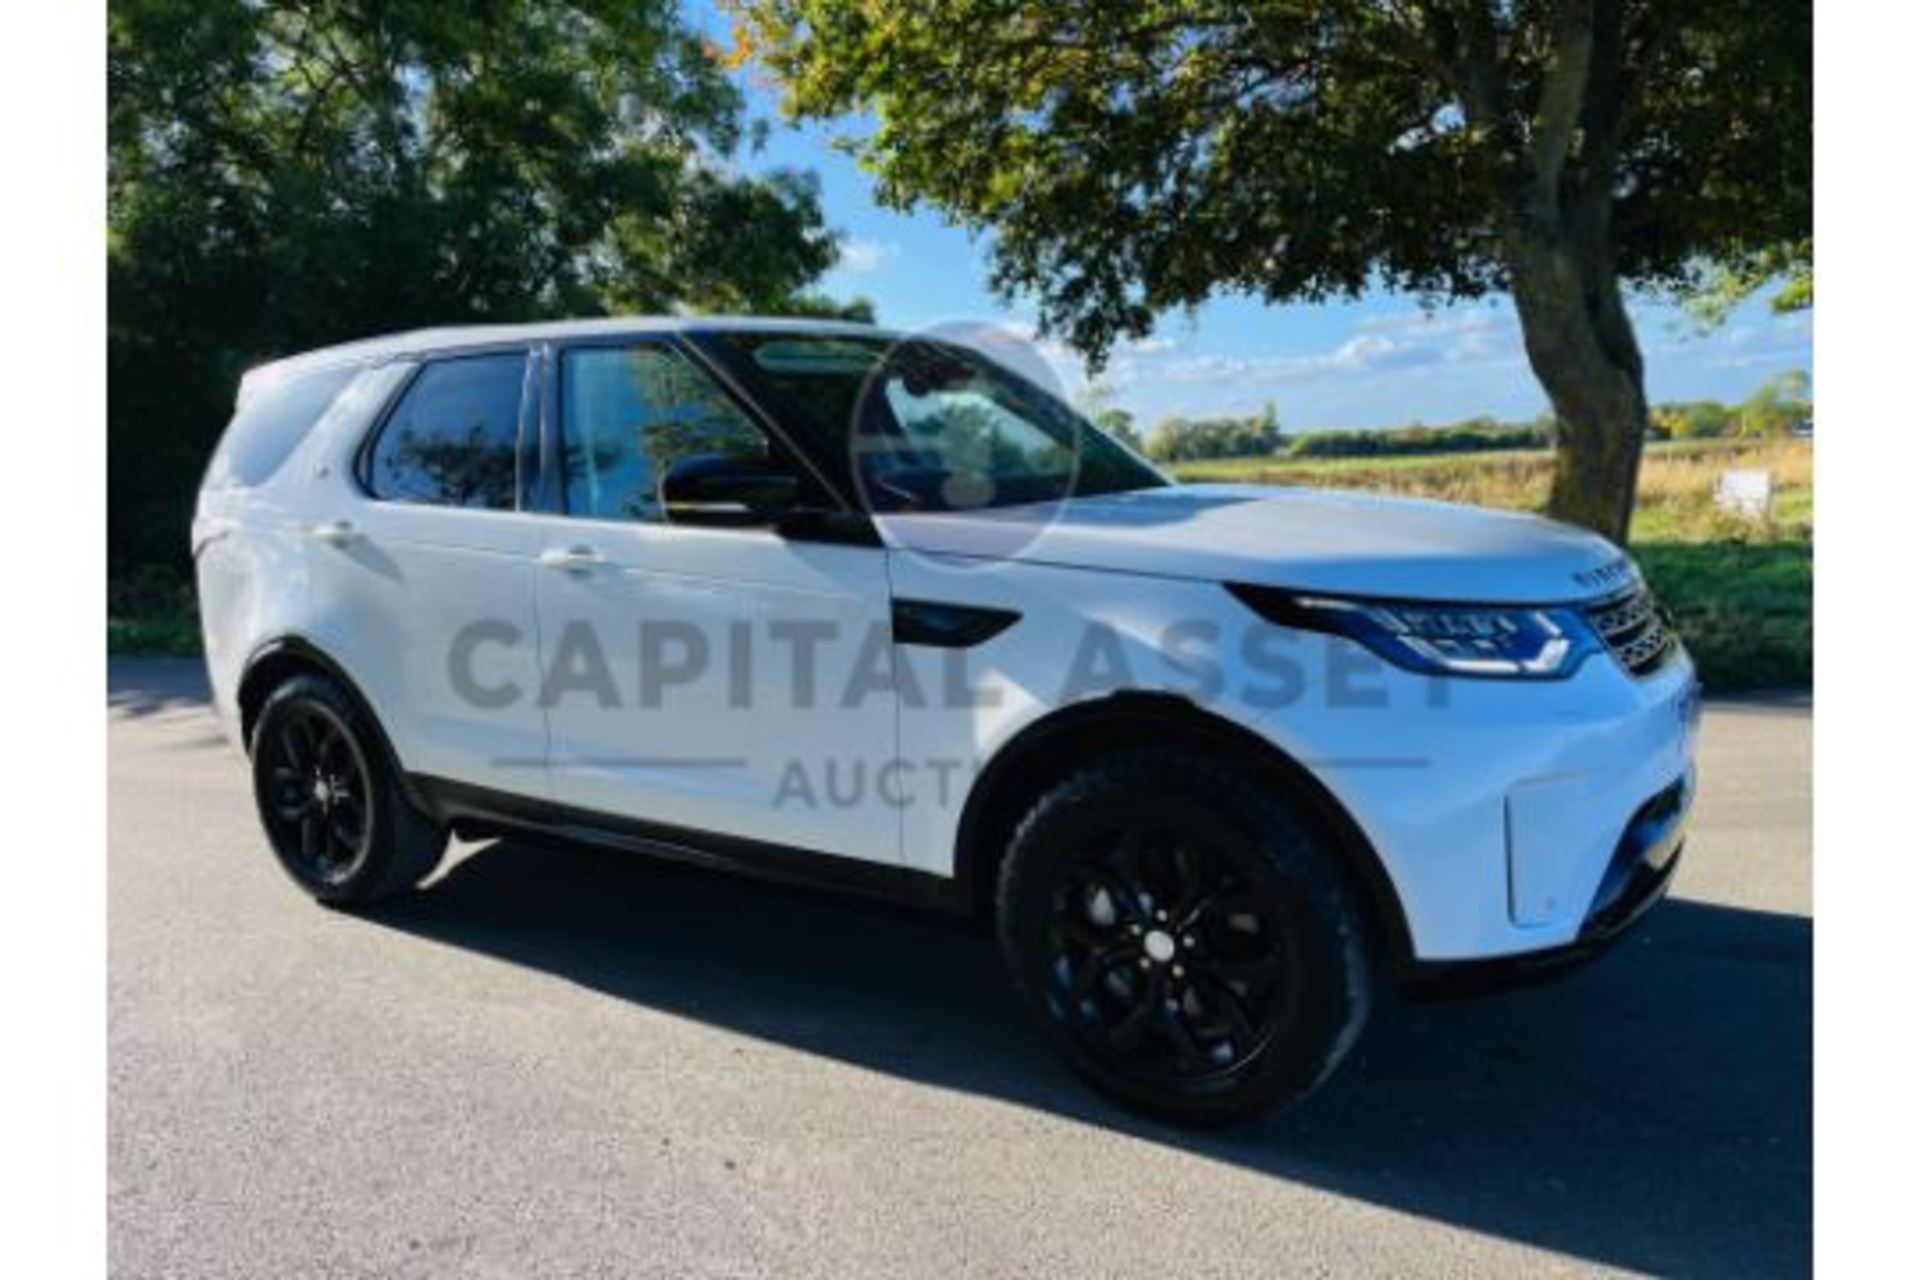 (ON SALE) LAND ROVER DISCOVERY 5 "SDV6 3.0" 'AUTO' 20 REG -1 OWNER -LEATHER- SAT NAV - NO VAT - Image 5 of 36